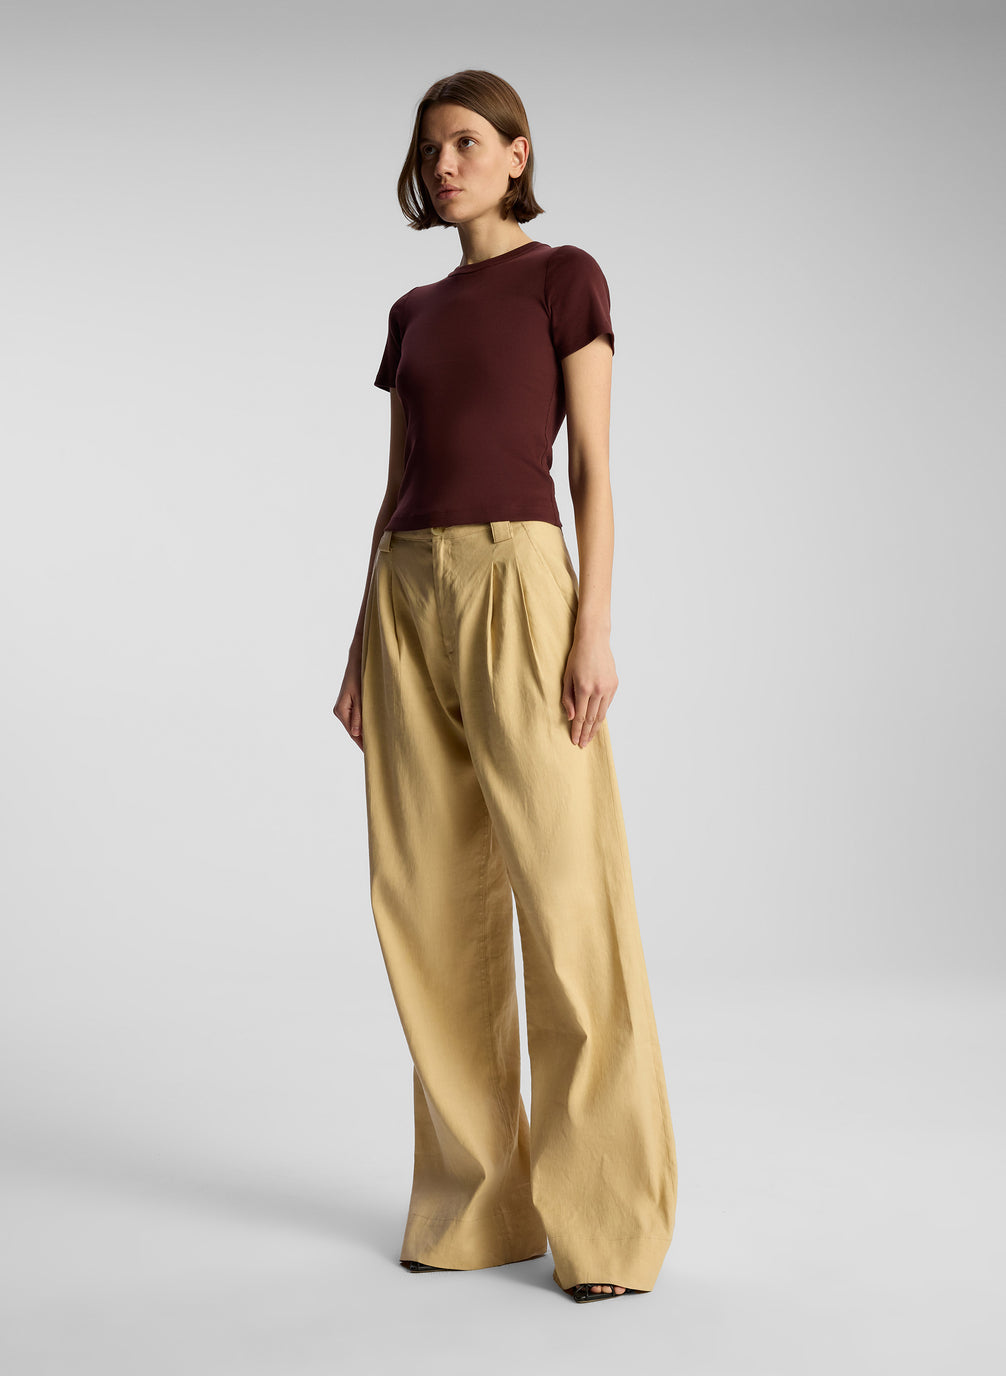 side view of woman wearing brown t shirt and tan pants